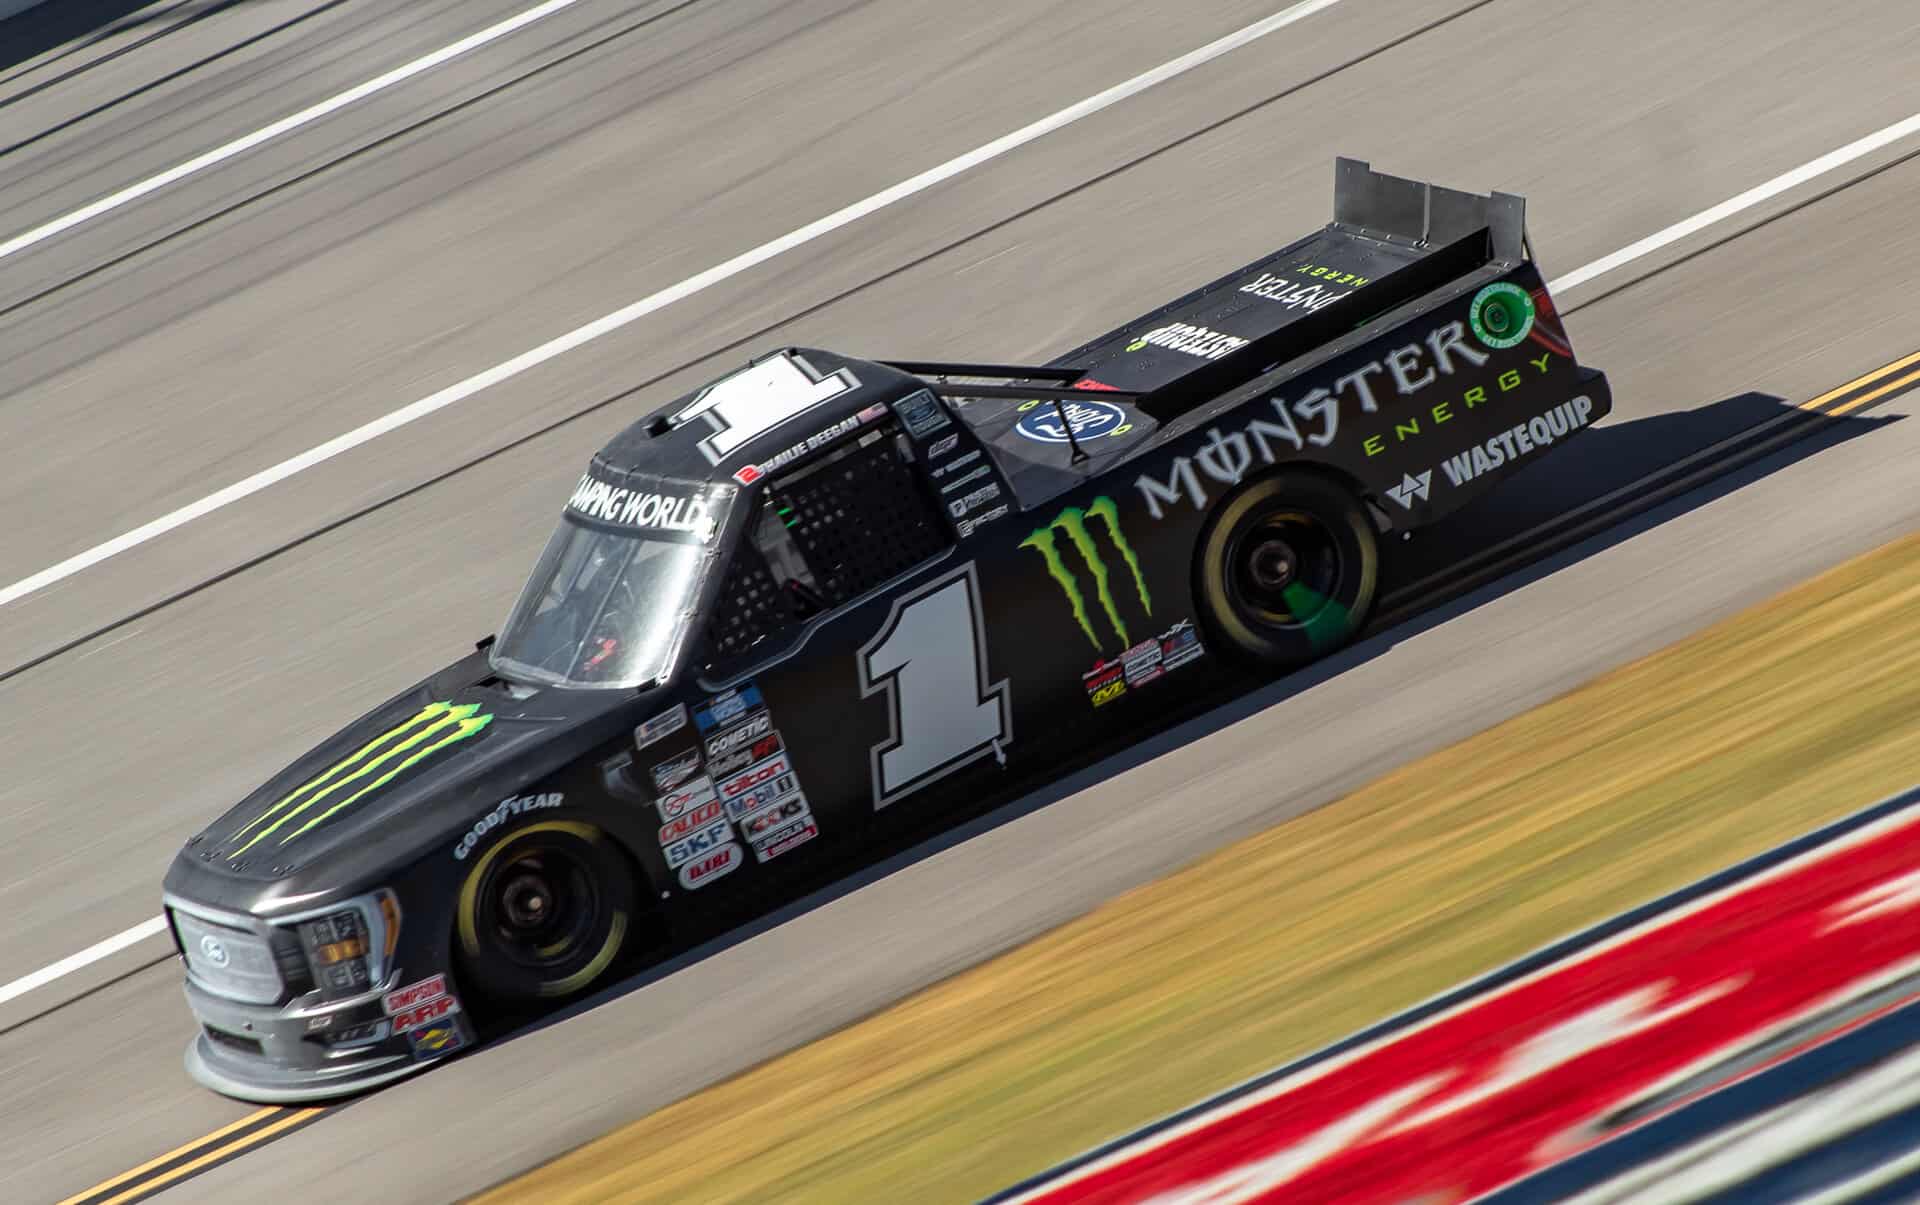 Hailie Deegan earned her career best finish in the NASCAR Camping World Truck Series at Talladega Superspeedway.